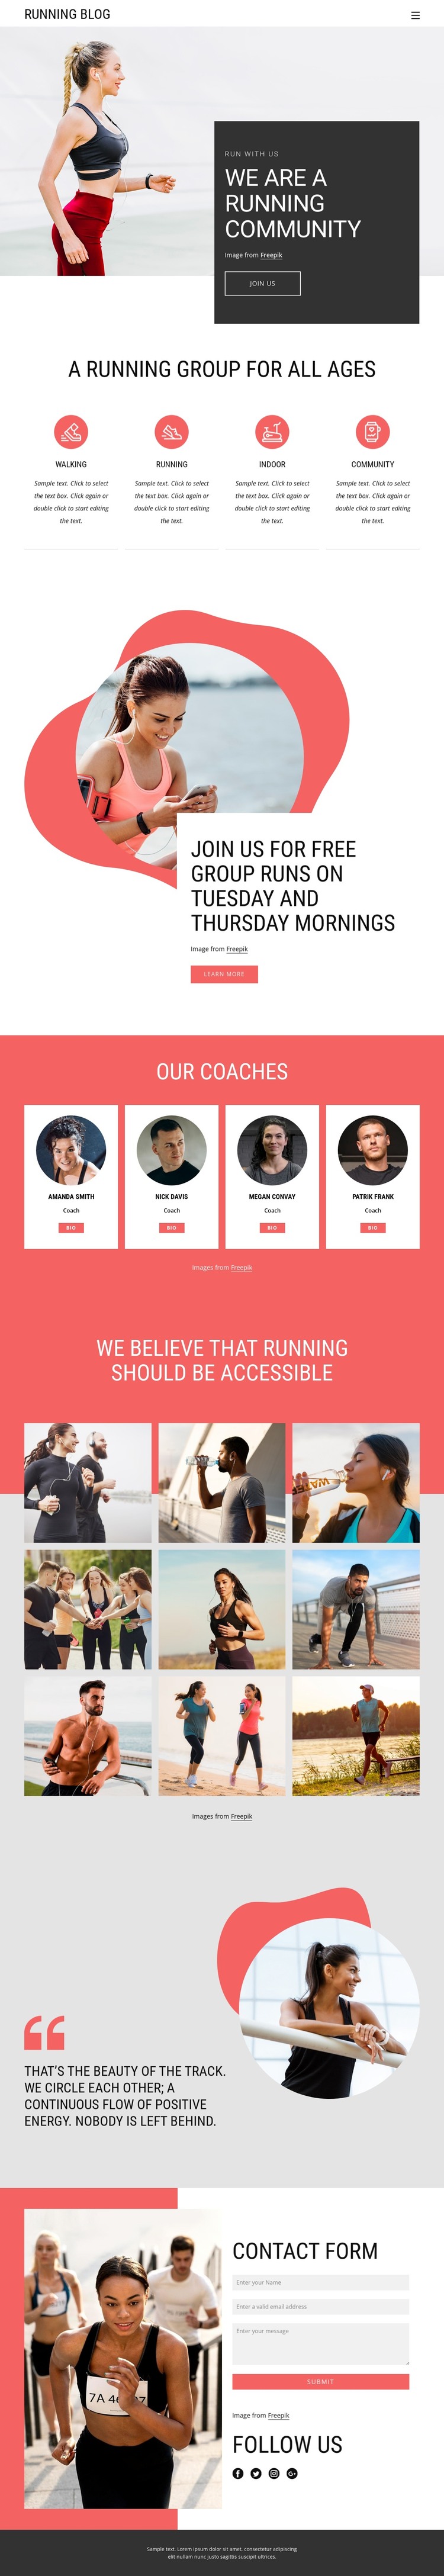 The Benefits of joining a run club Web Design